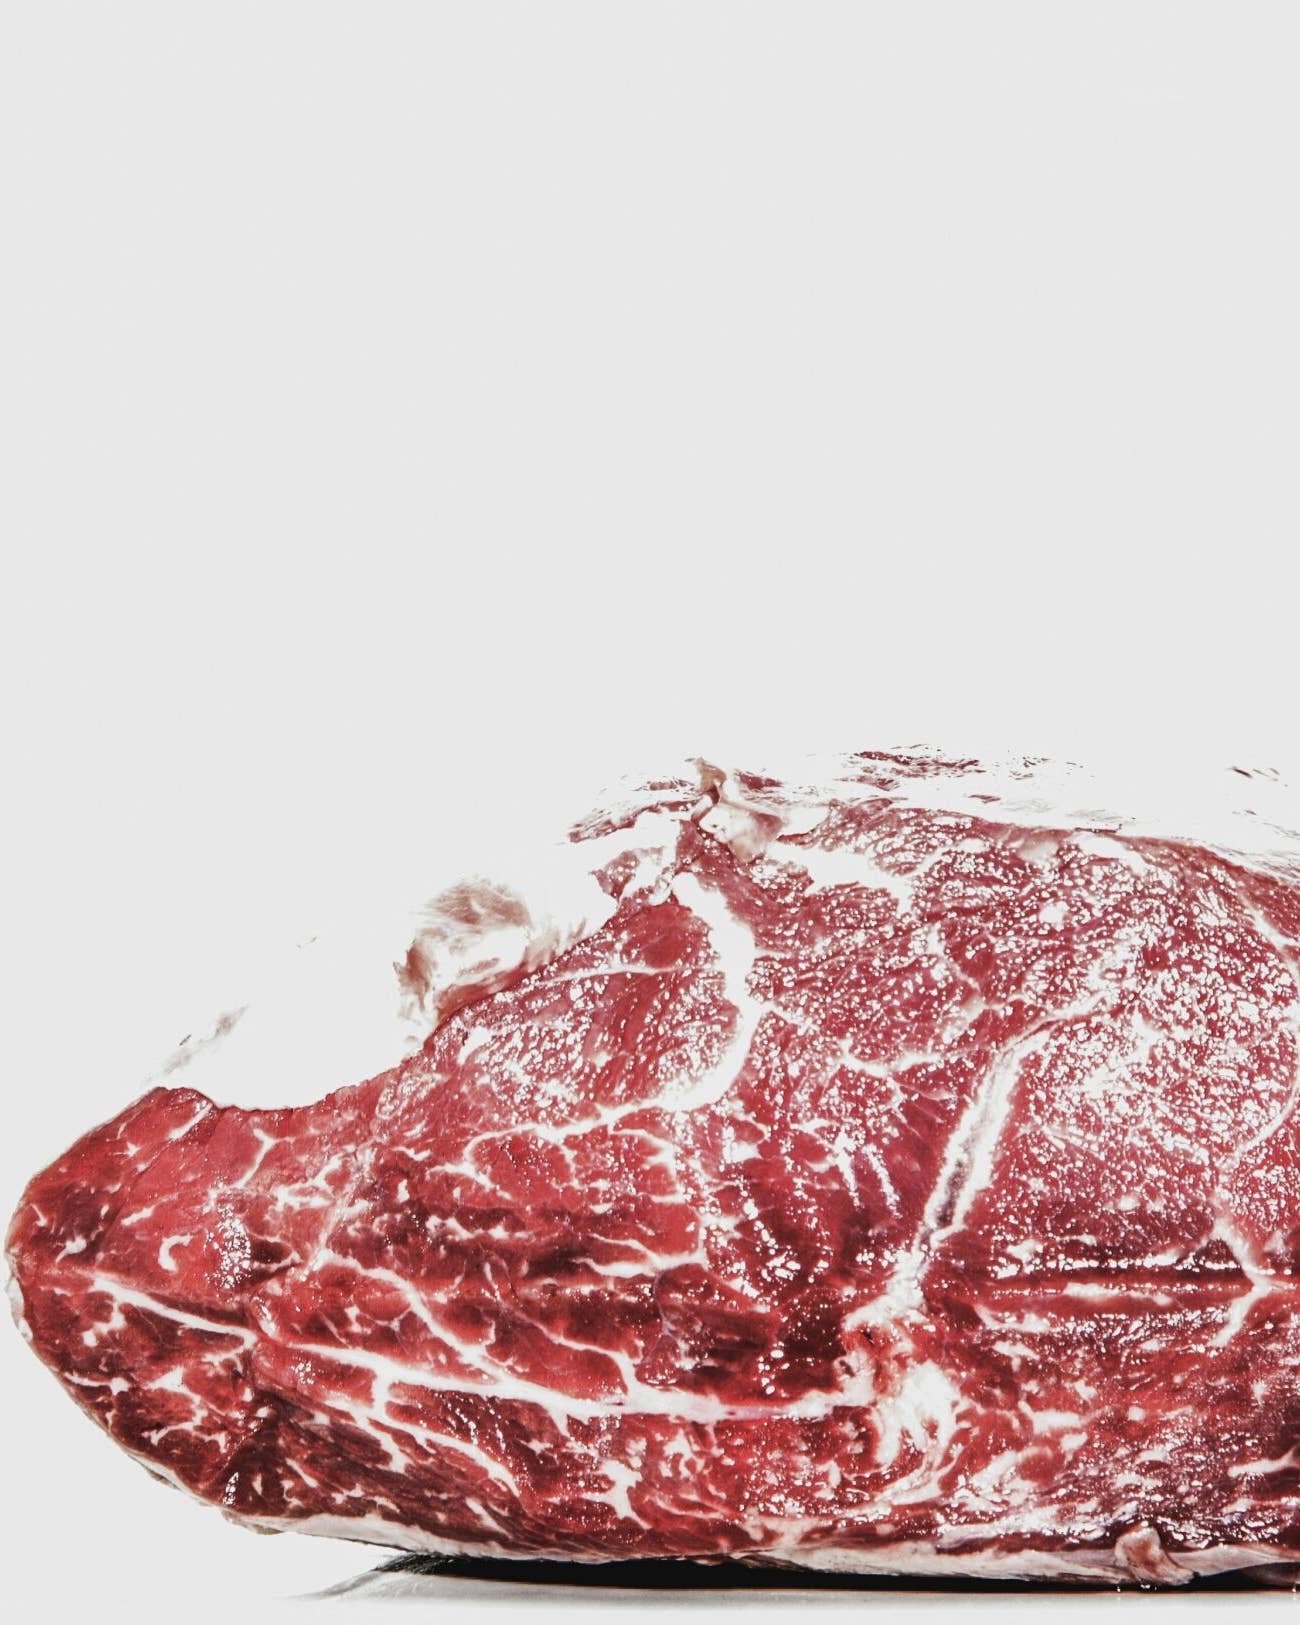 The Tools You Need to Dry-Age Beef at Home